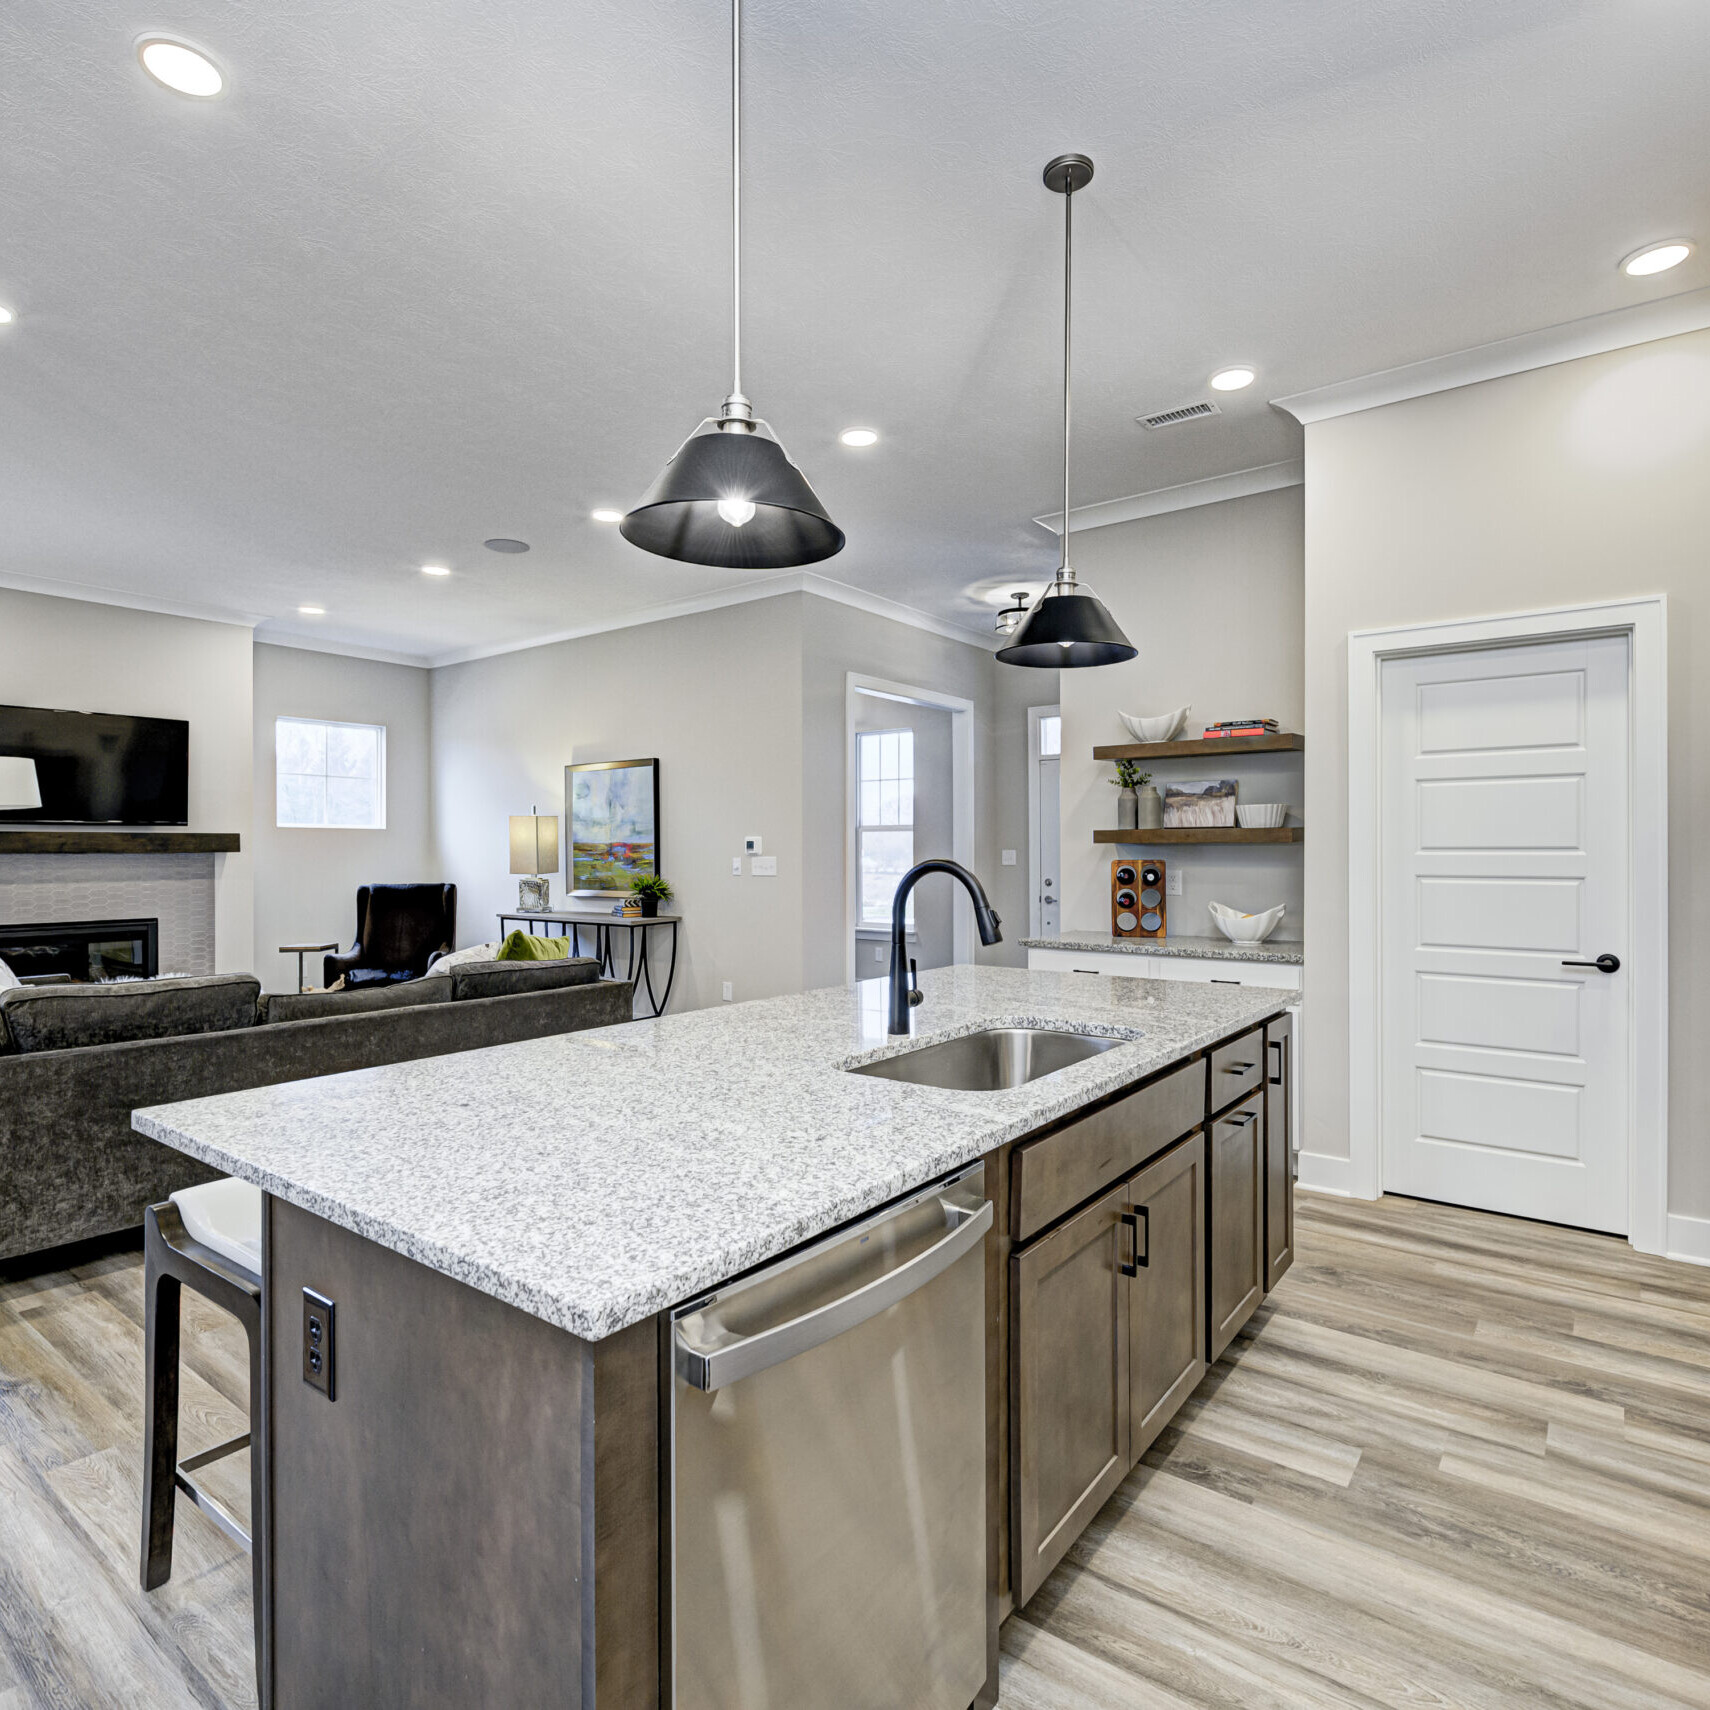 A custom kitchen with hardwood floors and stainless steel appliances in a new home.